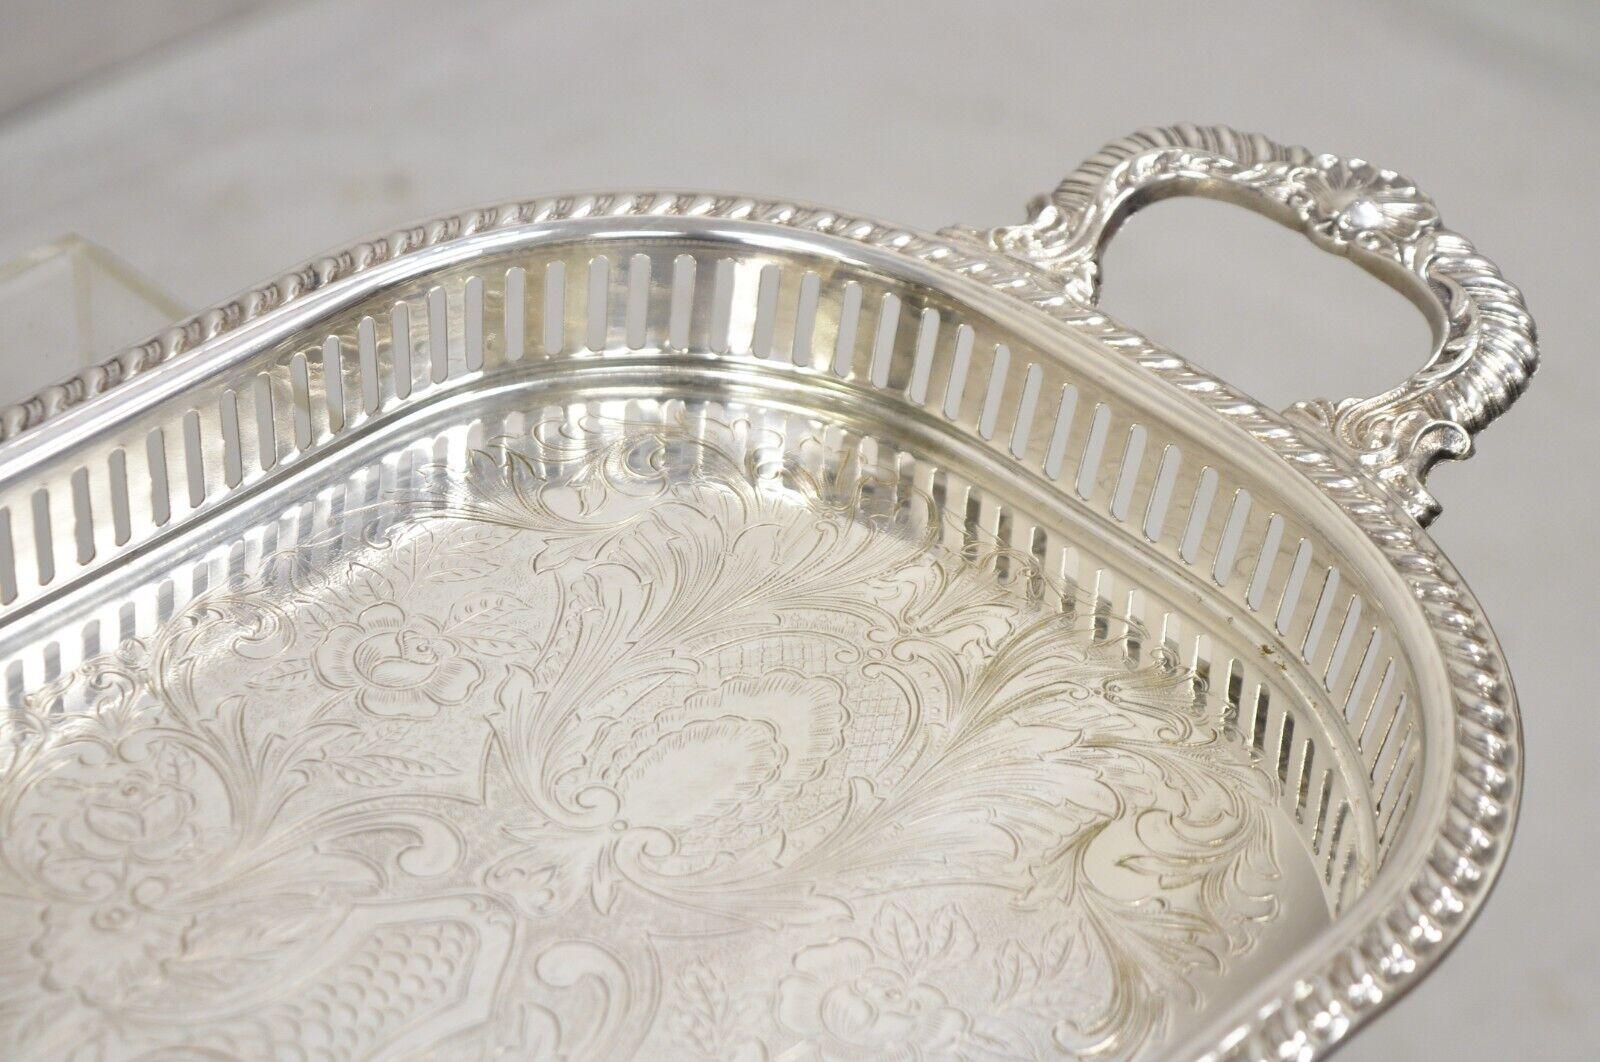 Vtg Victorian Style Silver Plated Narrow Oval Serving Platter Tray by Regency For Sale 1